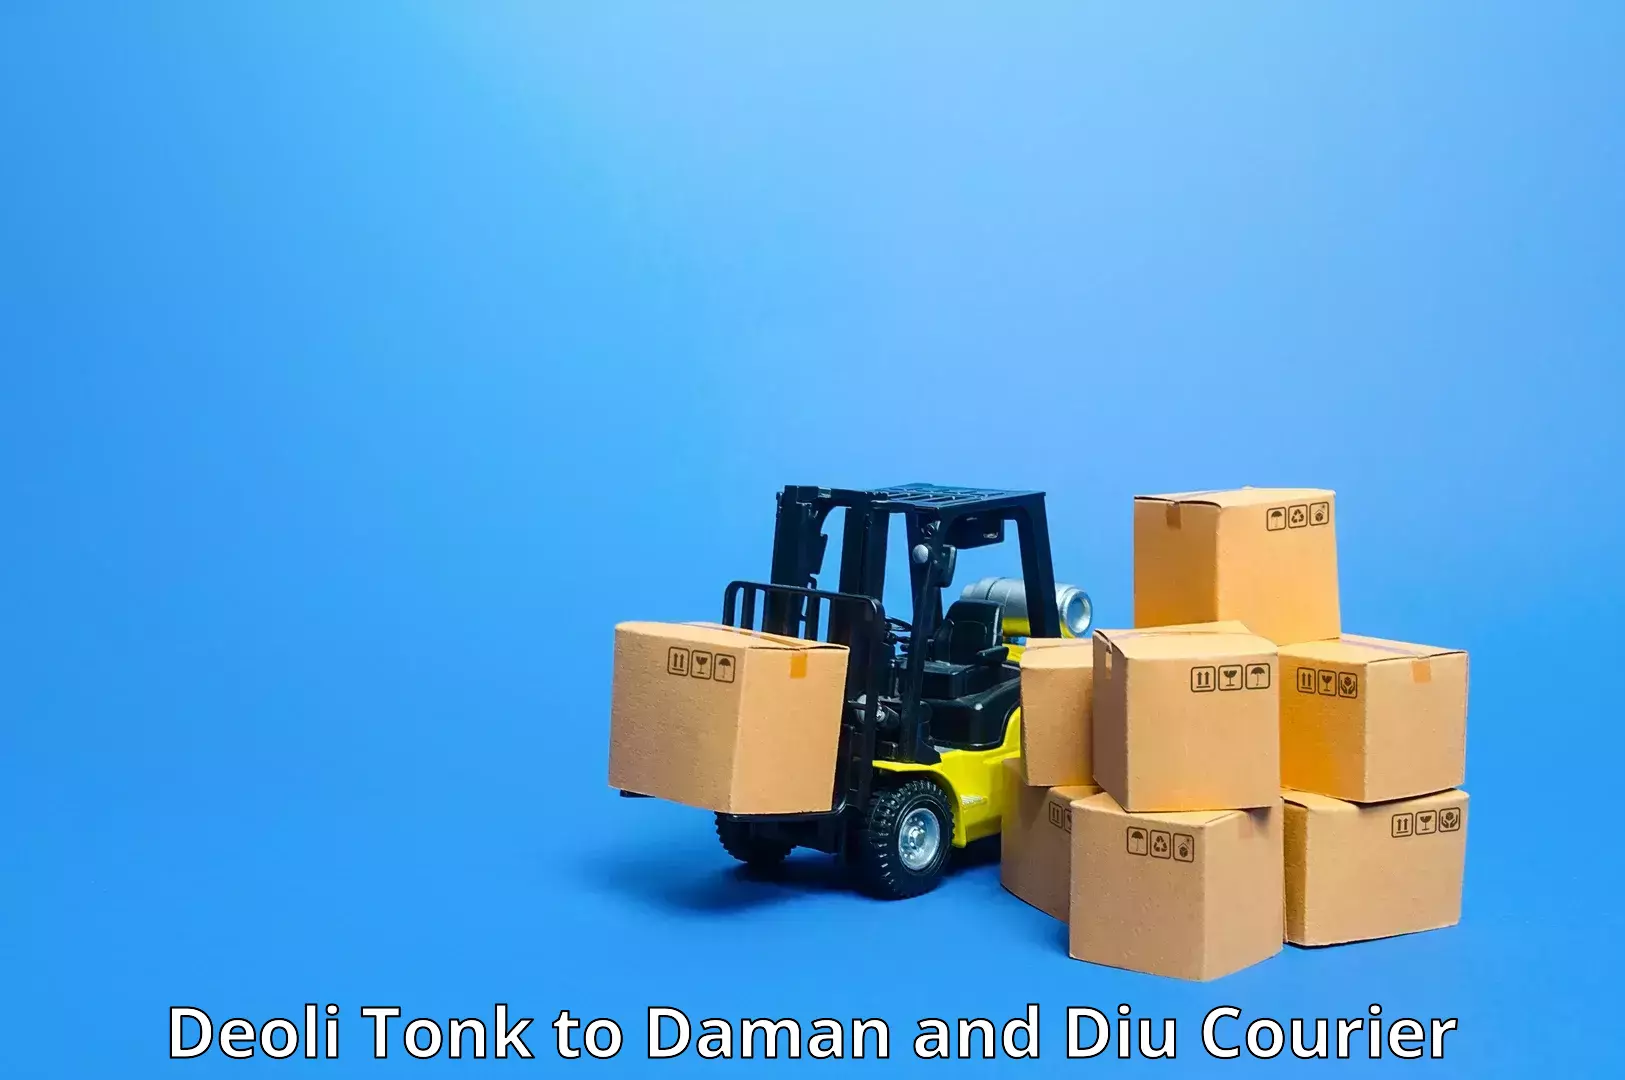 Fast-track shipping solutions Deoli Tonk to Daman and Diu